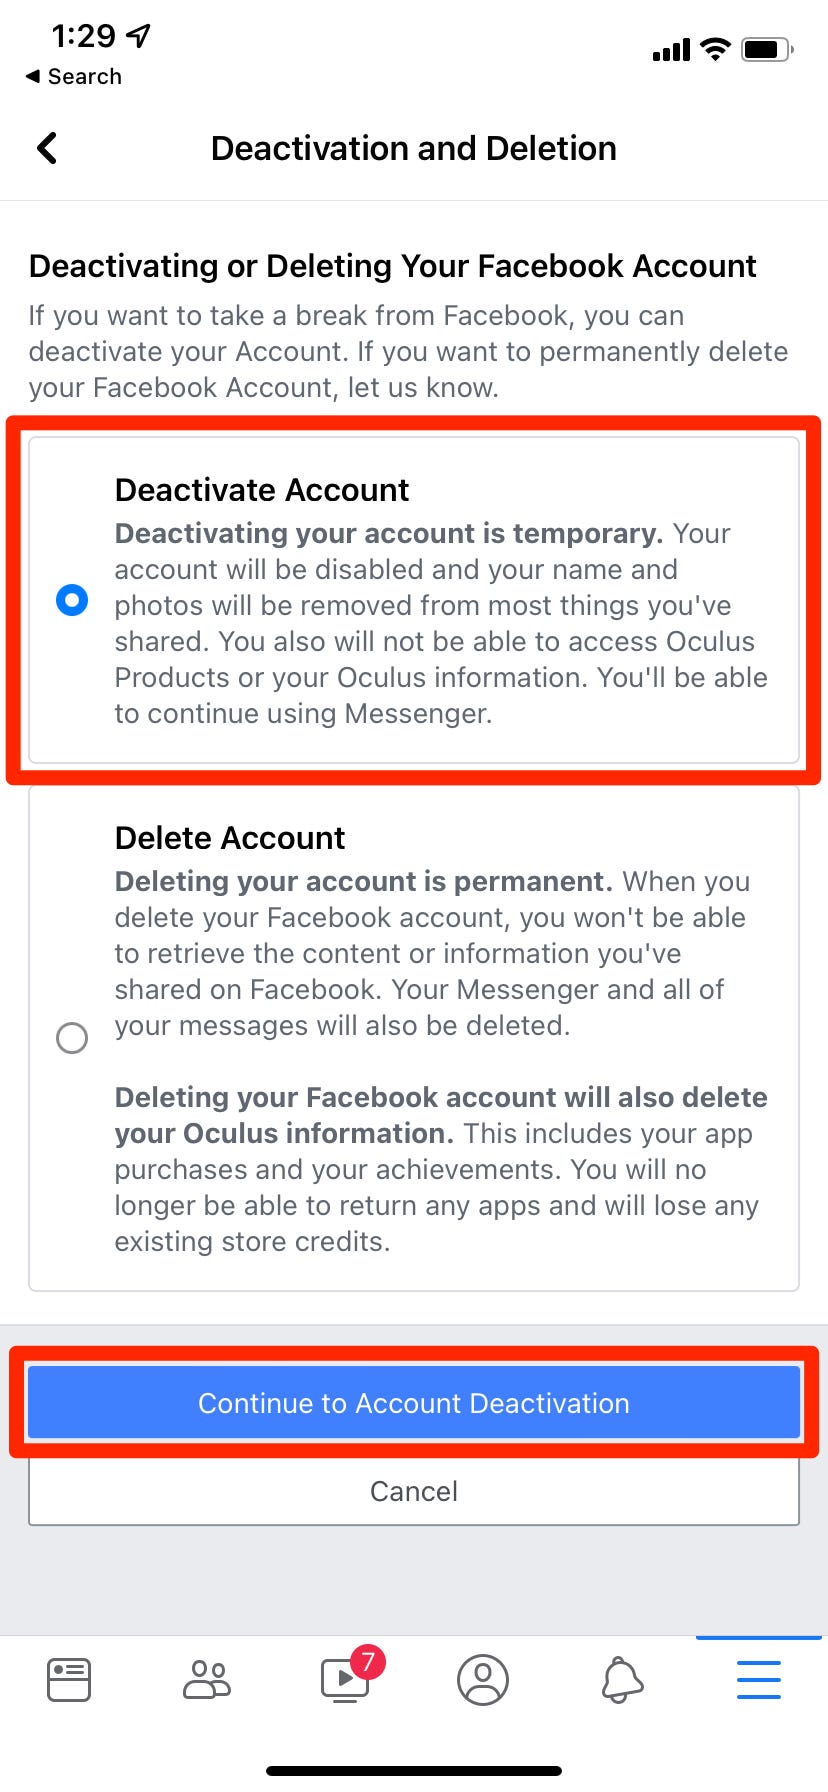 Can I Use Messenger If I Deactivate Facebook Stay Connected! Mark A